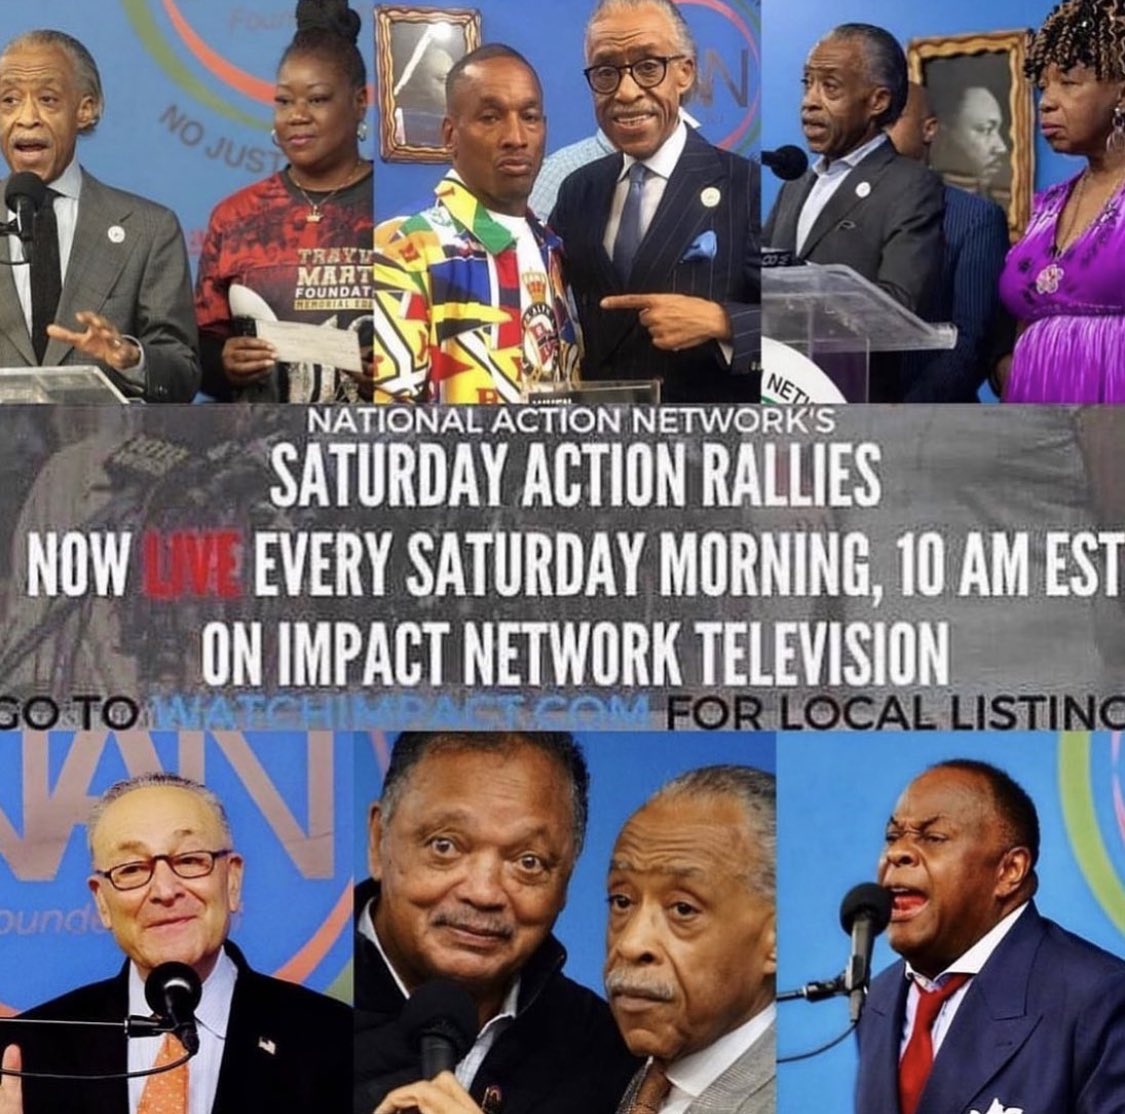 🗣TOMORROW, @NationalAction (NAN) will broadcast live across the country. Tune in to the #NANSaturdayActionRally at 9am ET via @1190amWLIB(radio)📻 & at 10am ET on @ImpactTVNetwork 📺. You can also tune in online via NAN’s Facebook or YouTube. #getintotheaction